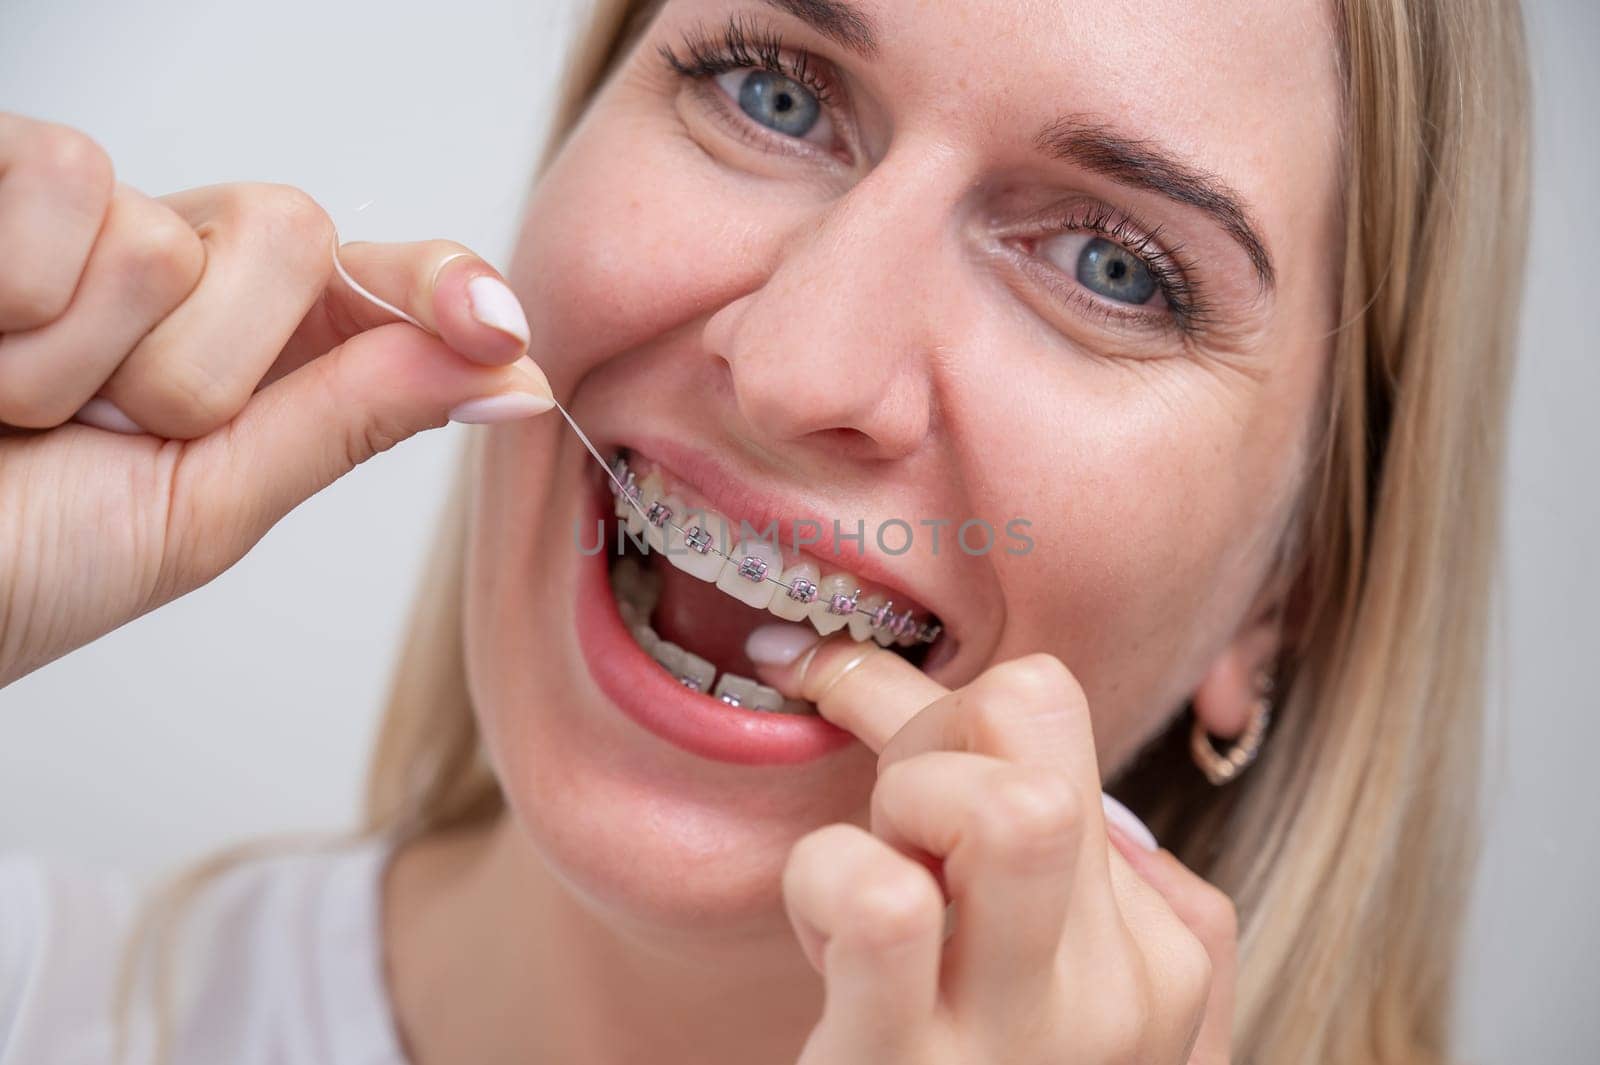 Caucasian woman cleaning her teeth with braces using dental floss